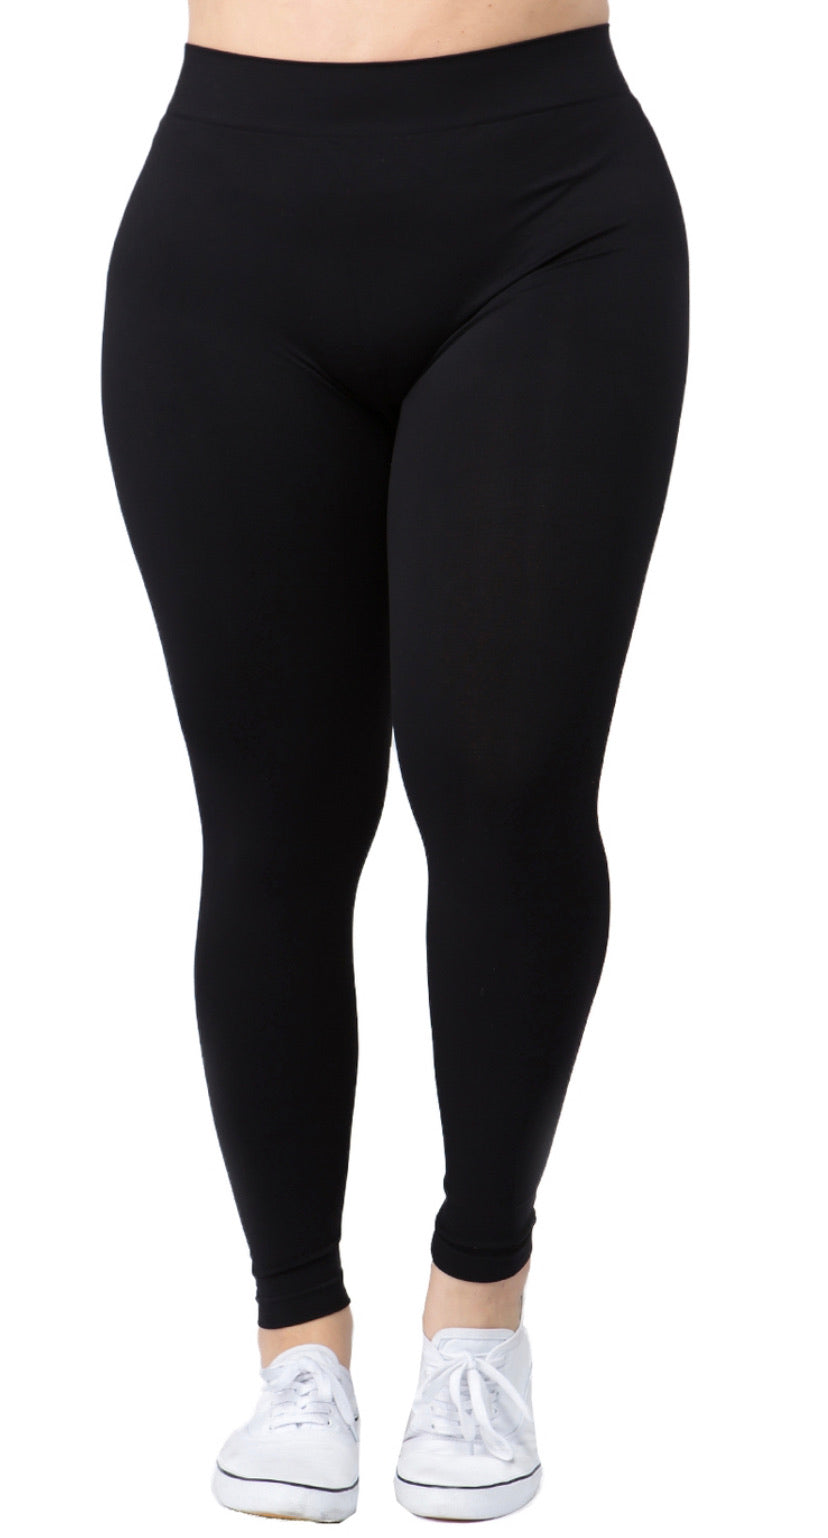 Soft Seamless Black Leggings One Size AND Plus!!